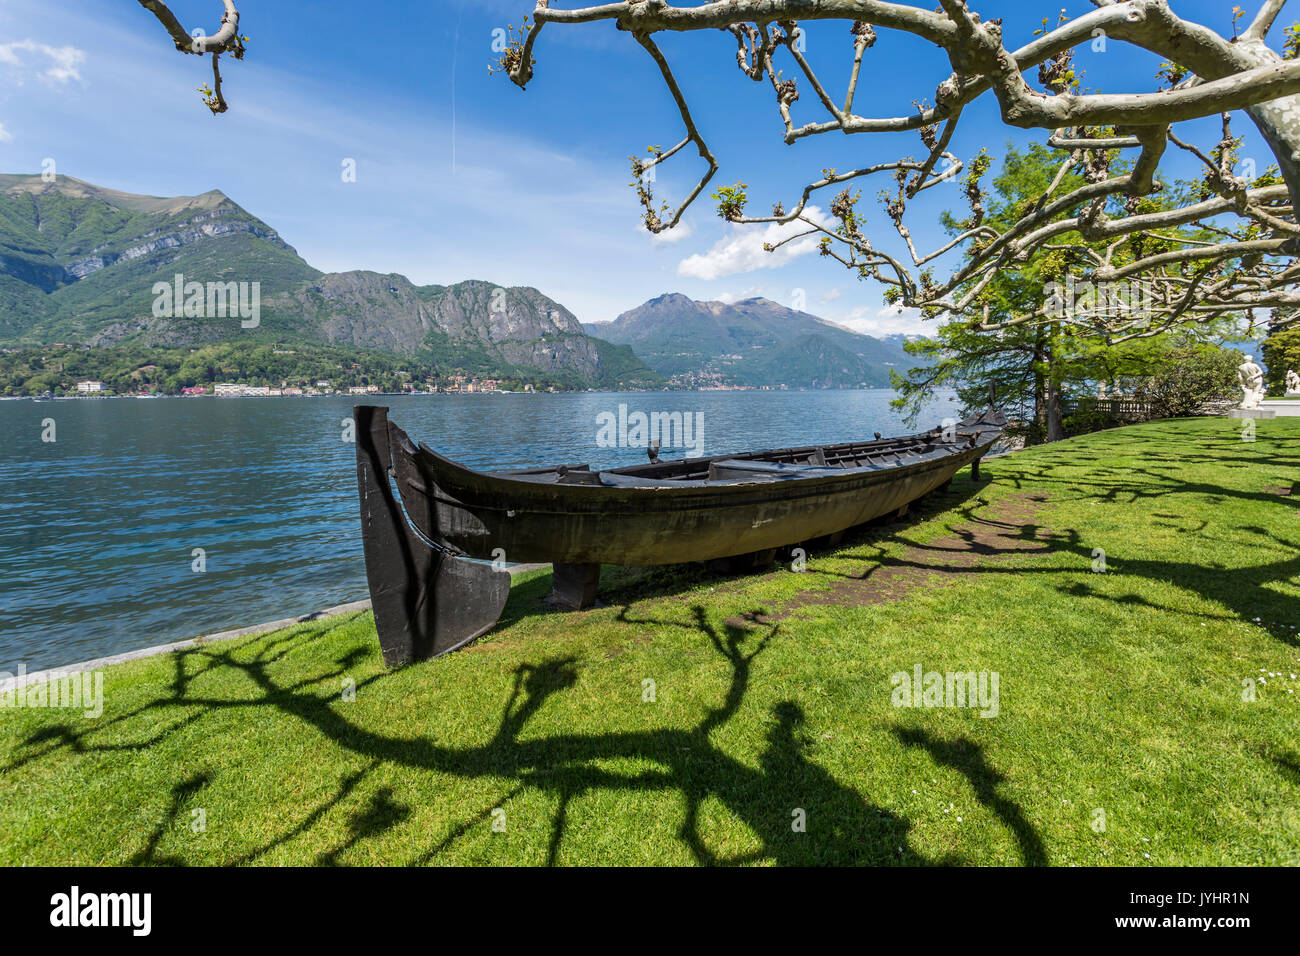 Old boat in the gardens of Villa Melzi d'Eril in Bellagio, Lombardy, Italy. Stock Photo